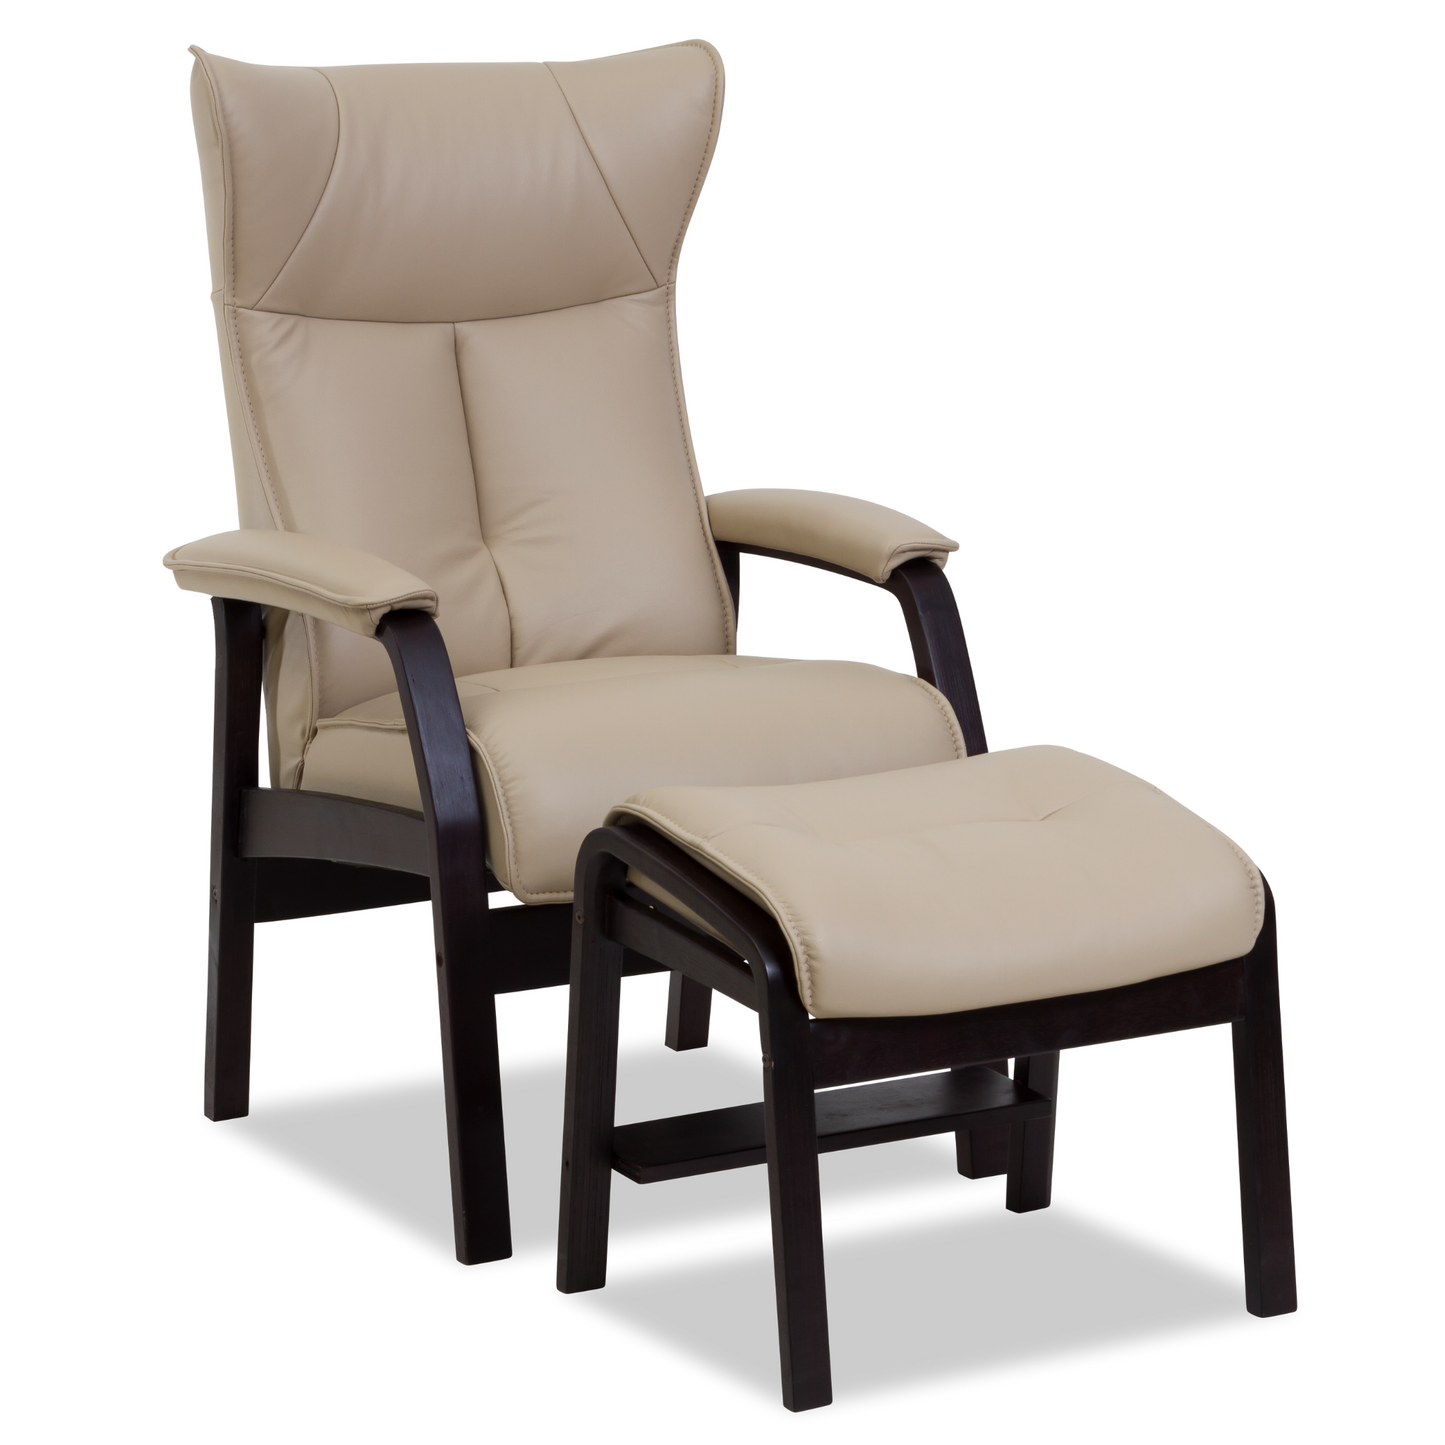 Romeo Recliner Chair by IMG